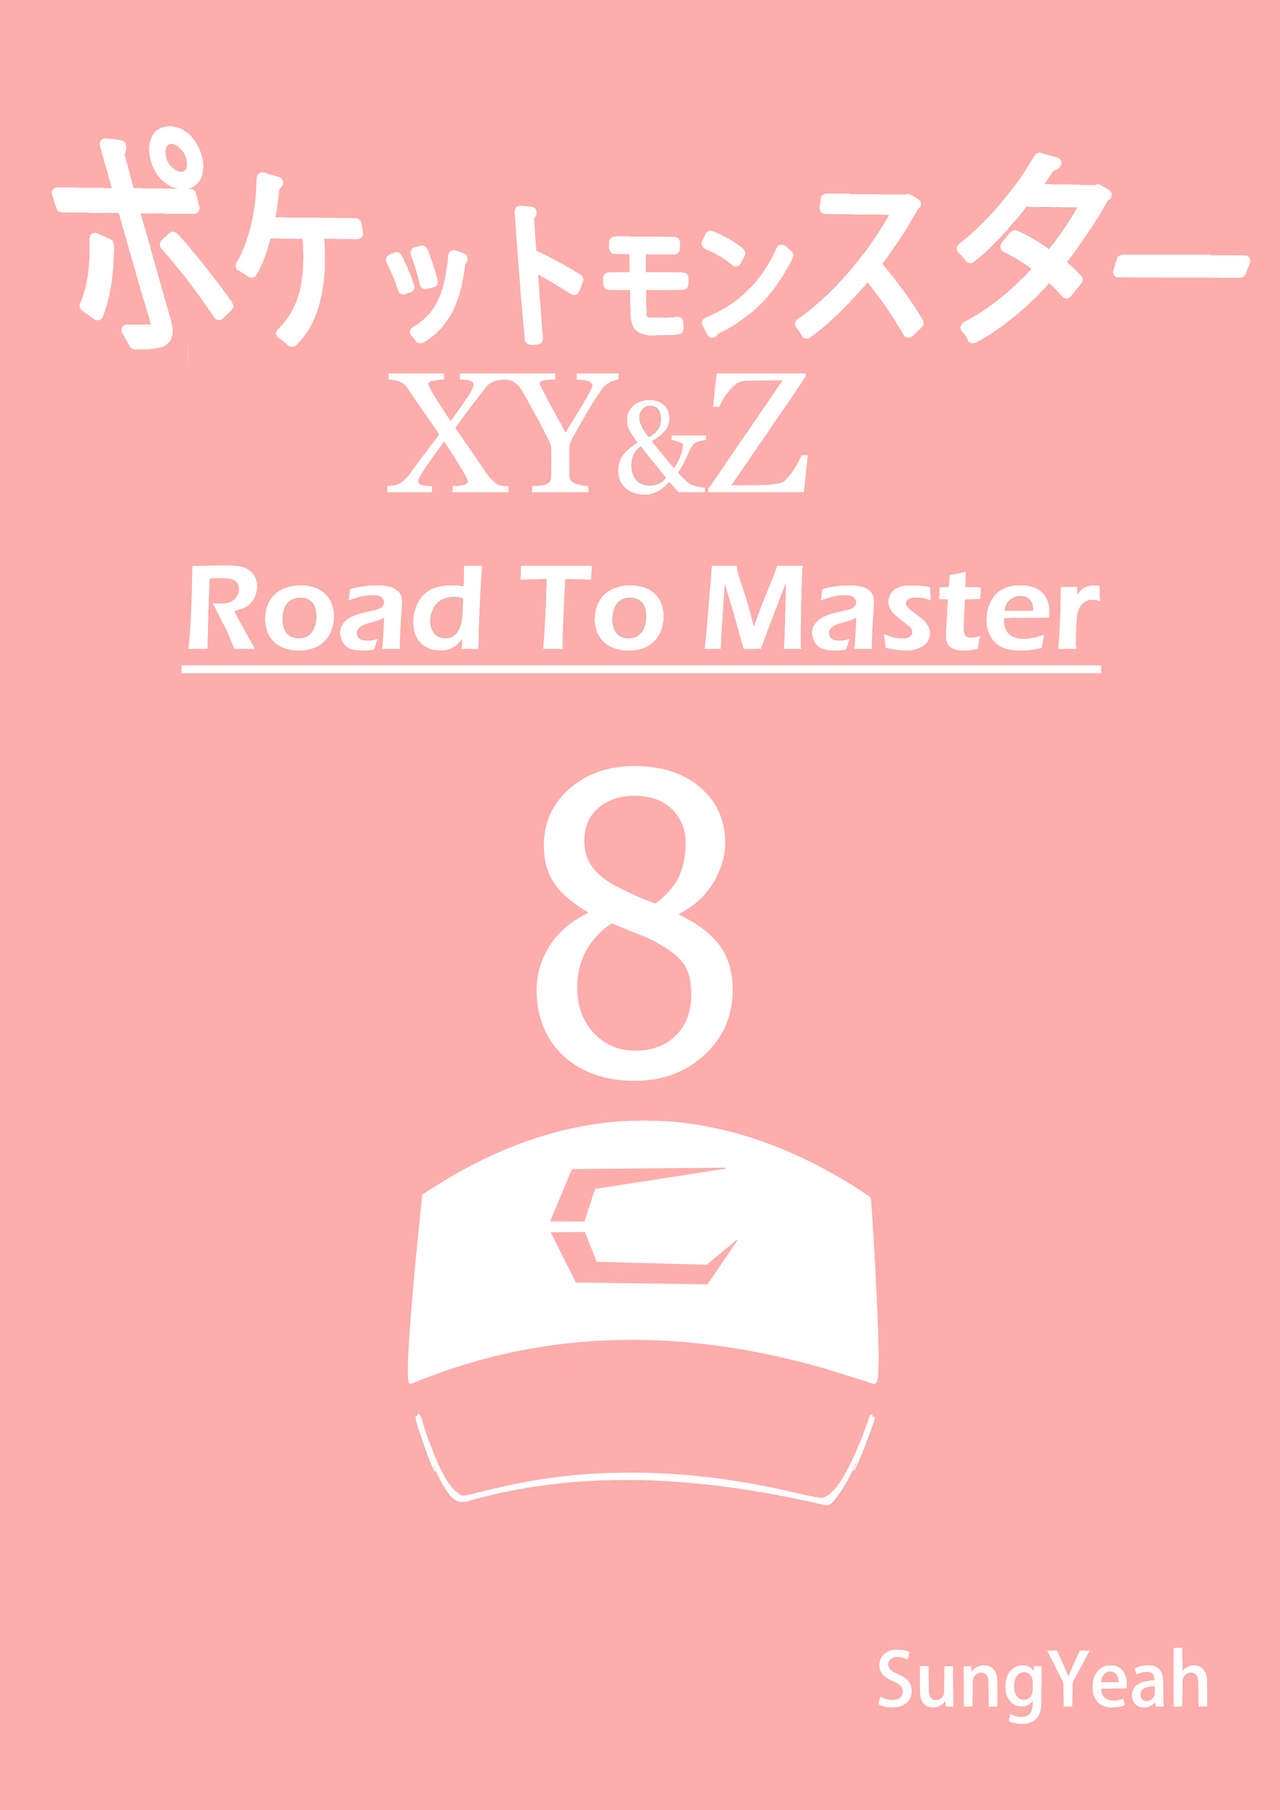 [Sungyeah] Pokemon - Road to Master - Complete 164